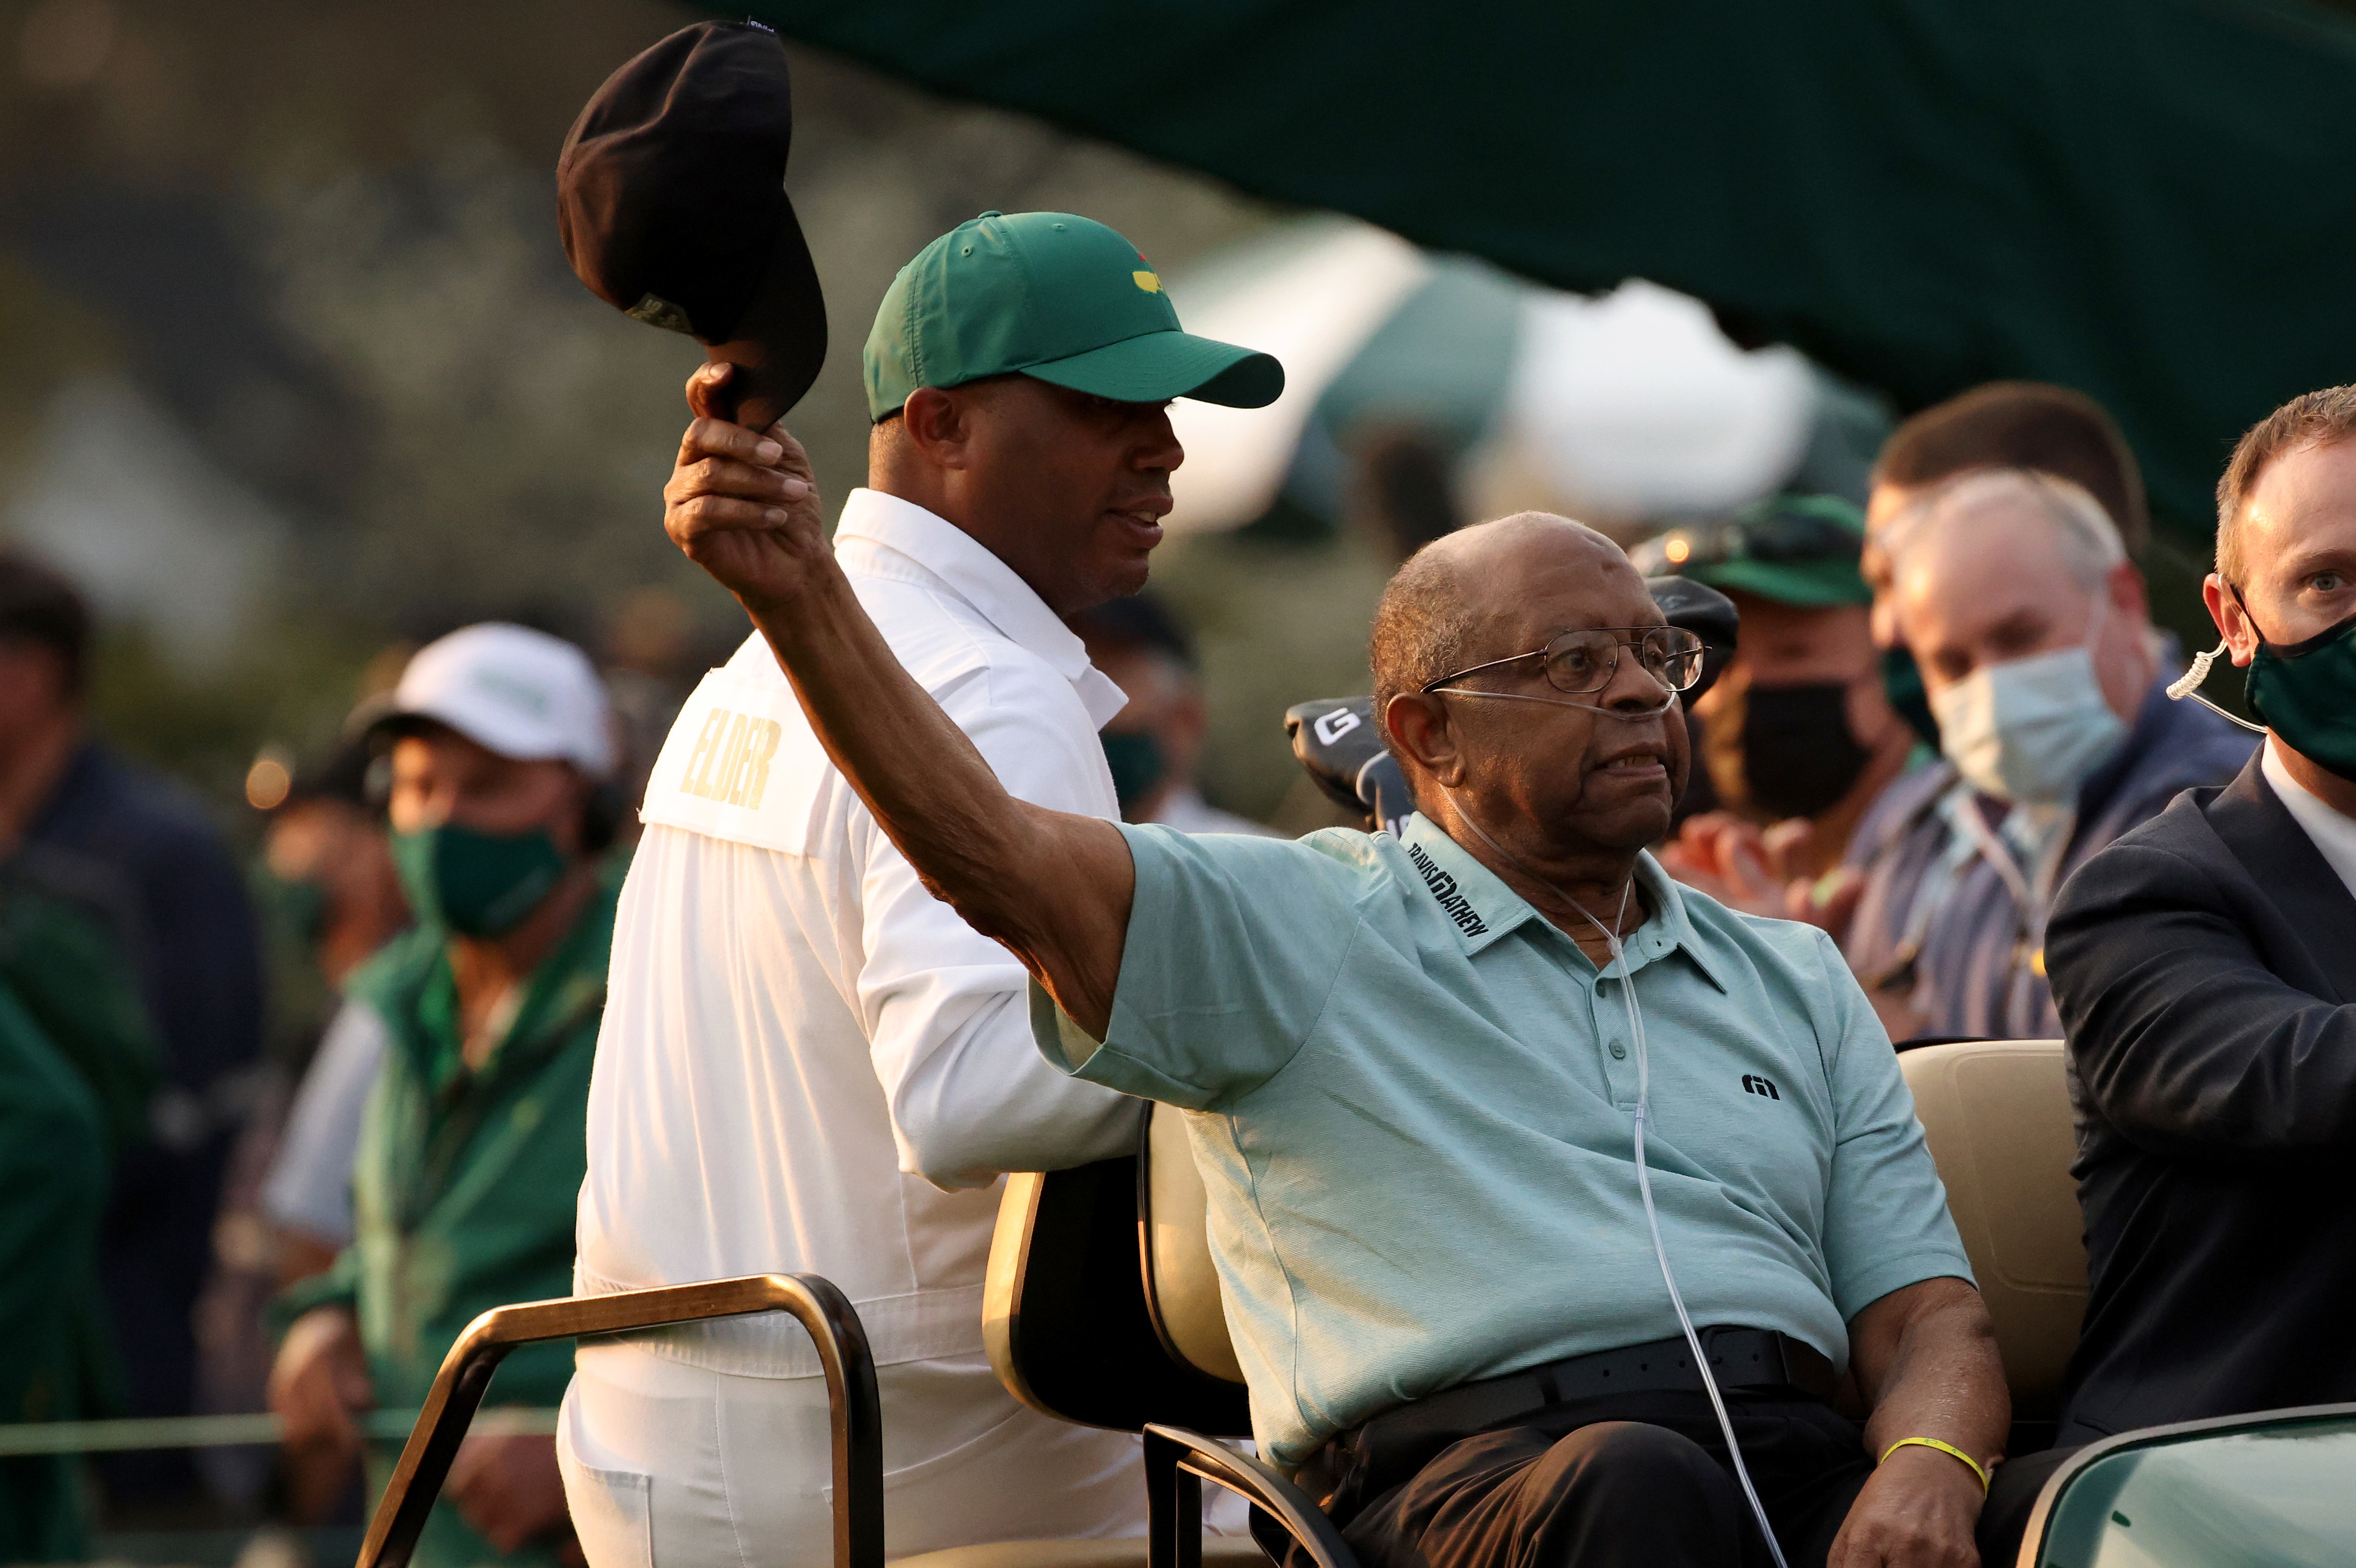 Lee Elder Dies at Age 87, Was 1st Black Golfer to Compete at the Masters